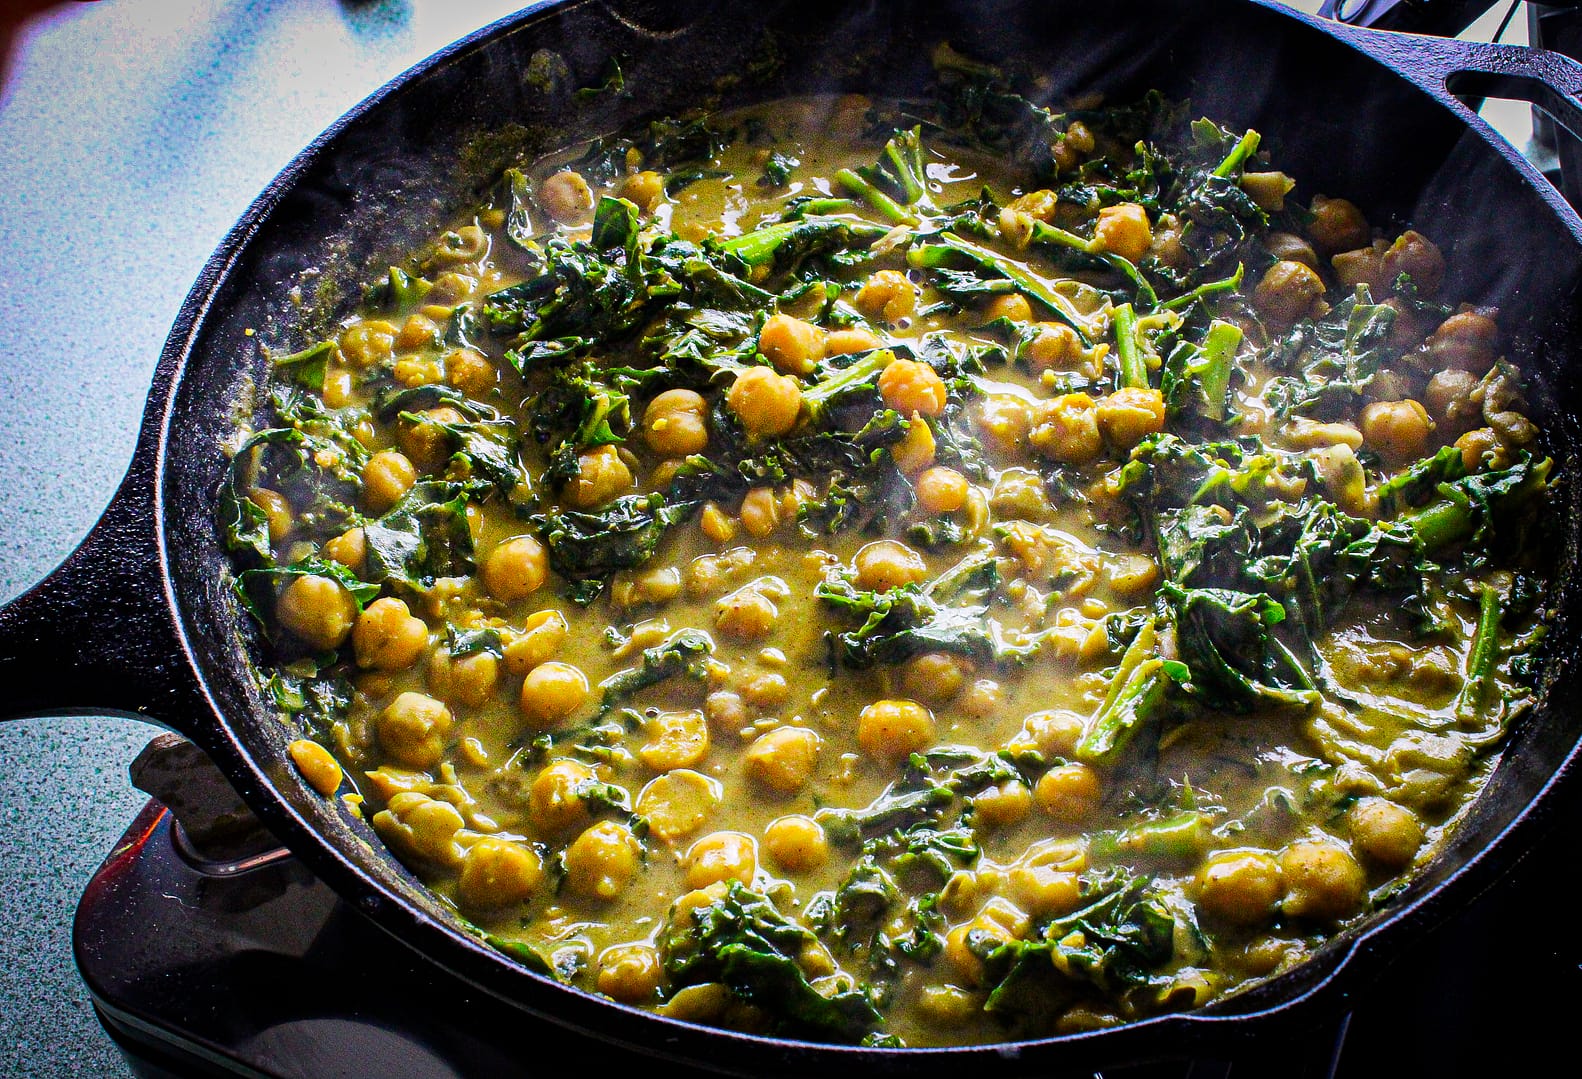 Curried chickpeas cooking.